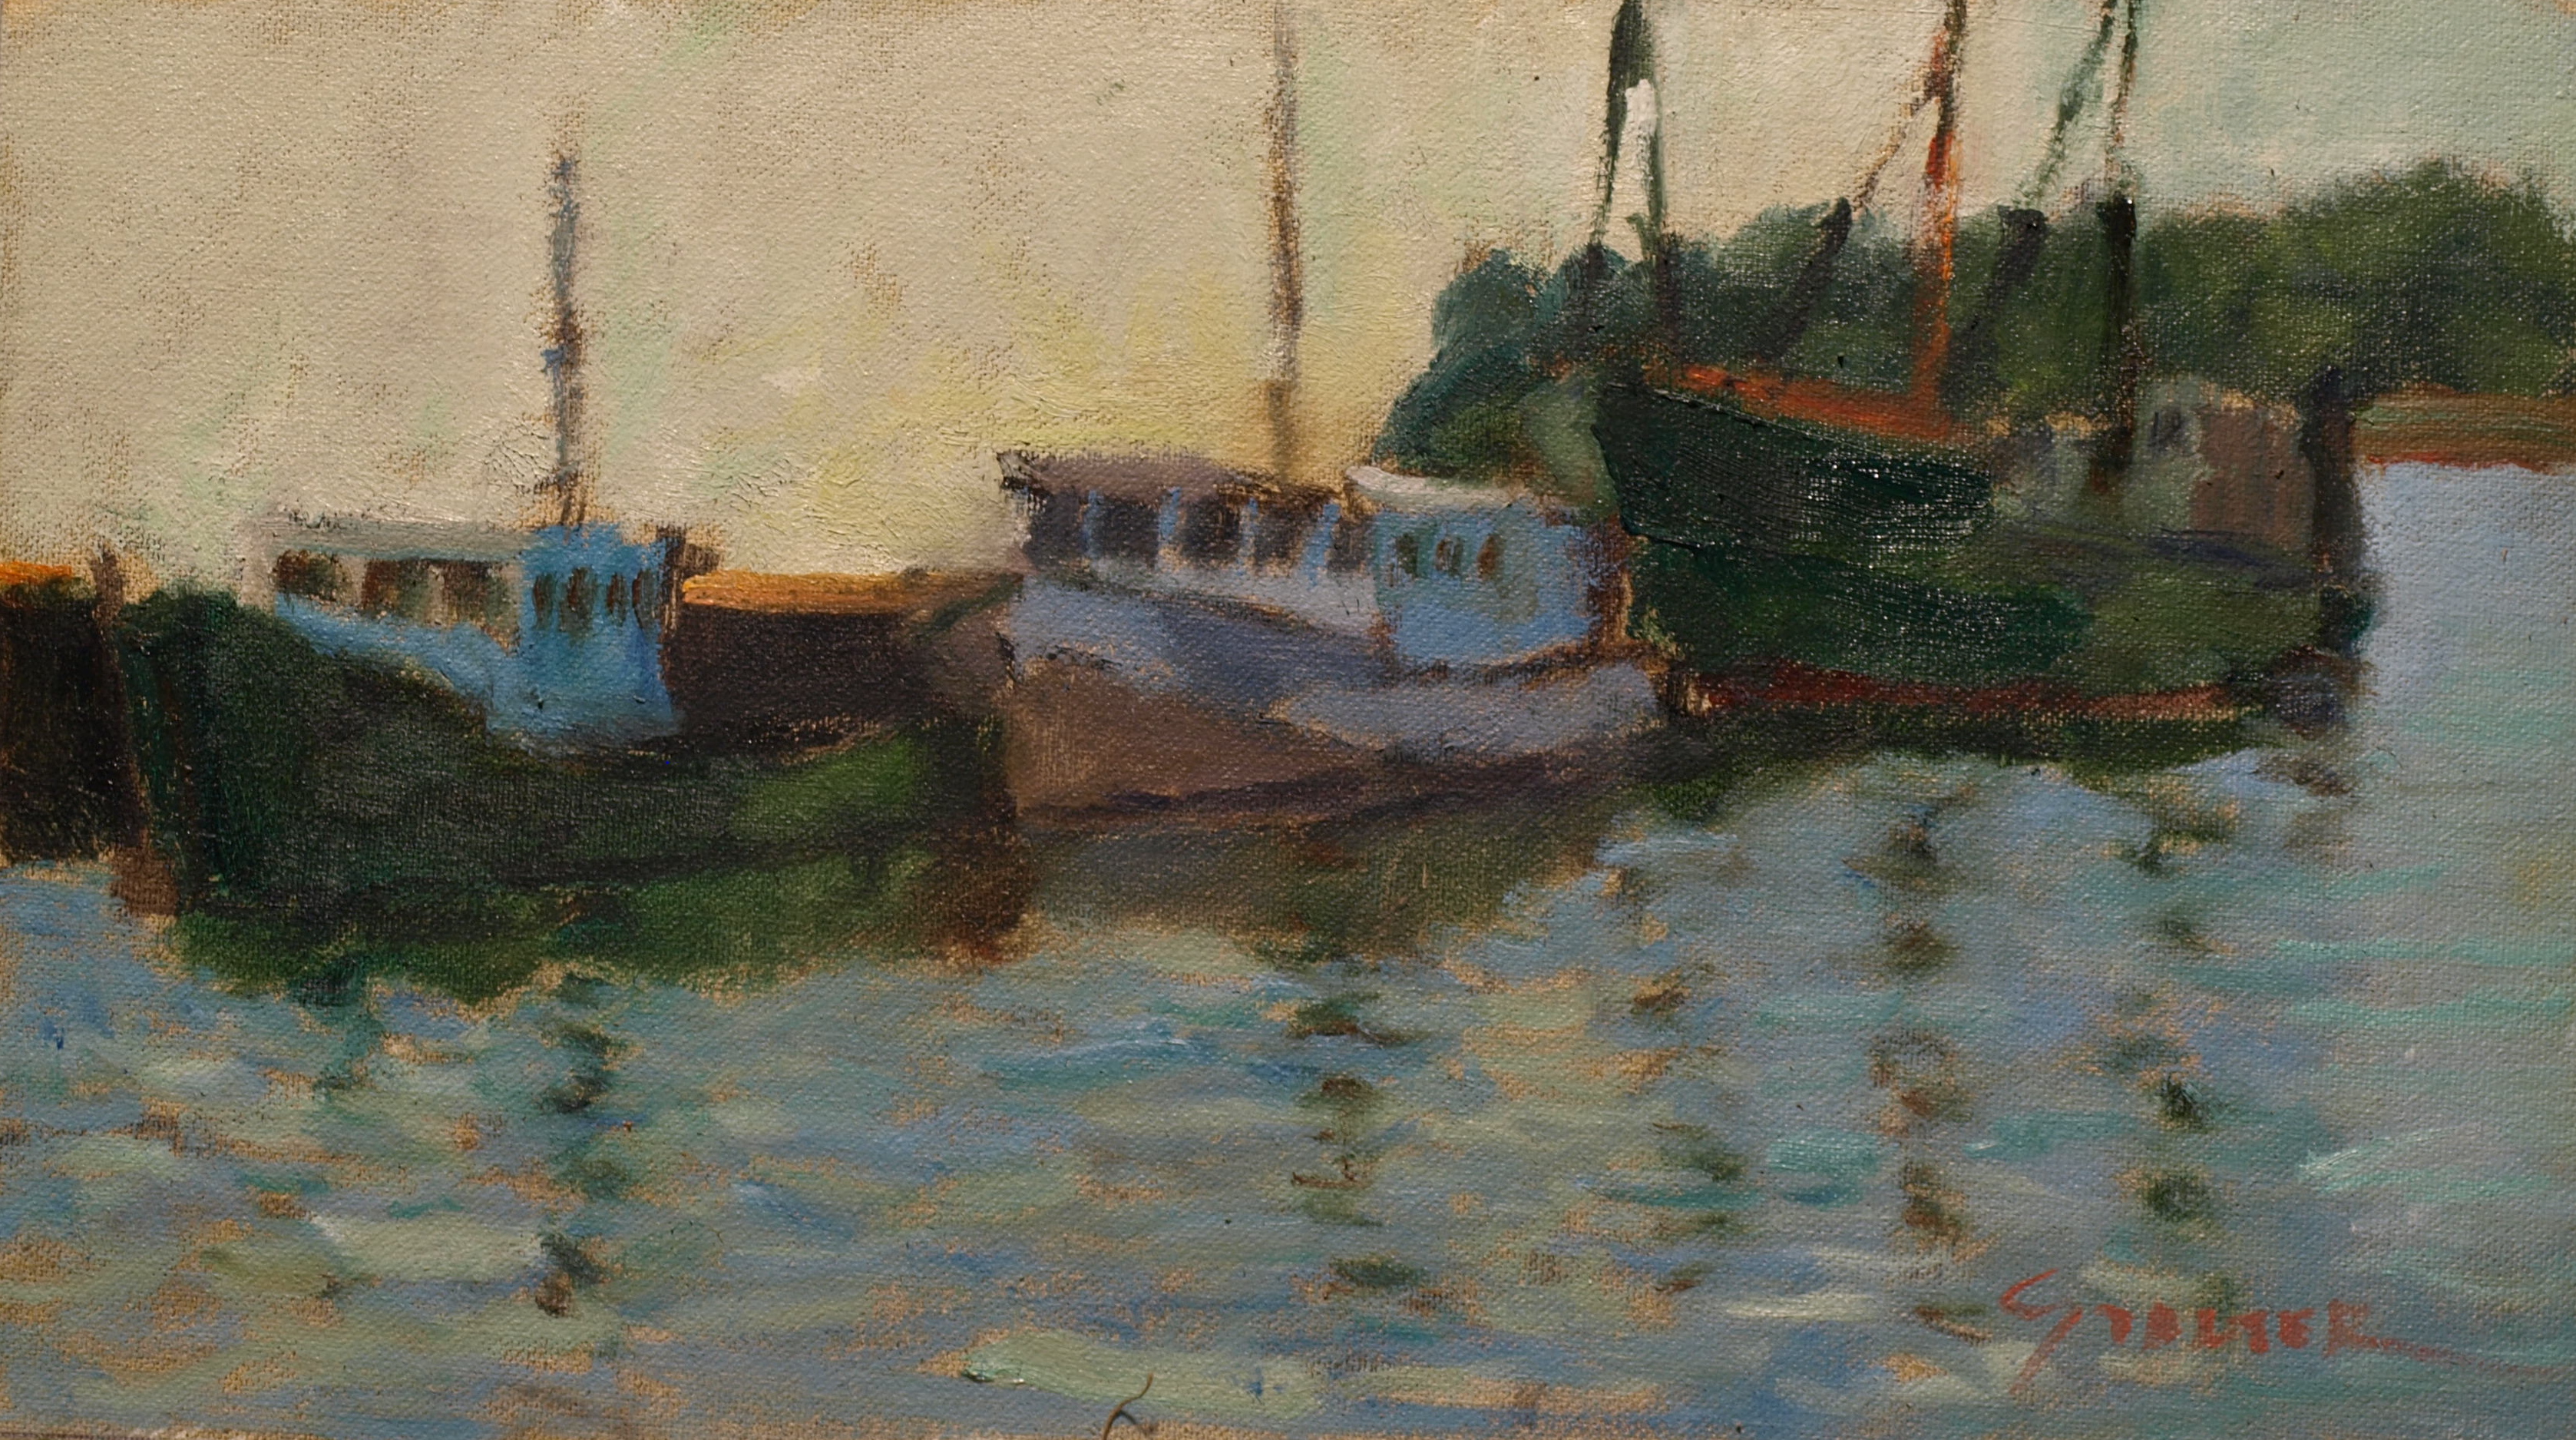 Fishing Boats Dockside, Oil on Canvas on Panel, 8 x 14 Inches, by Richard Stalter, $220